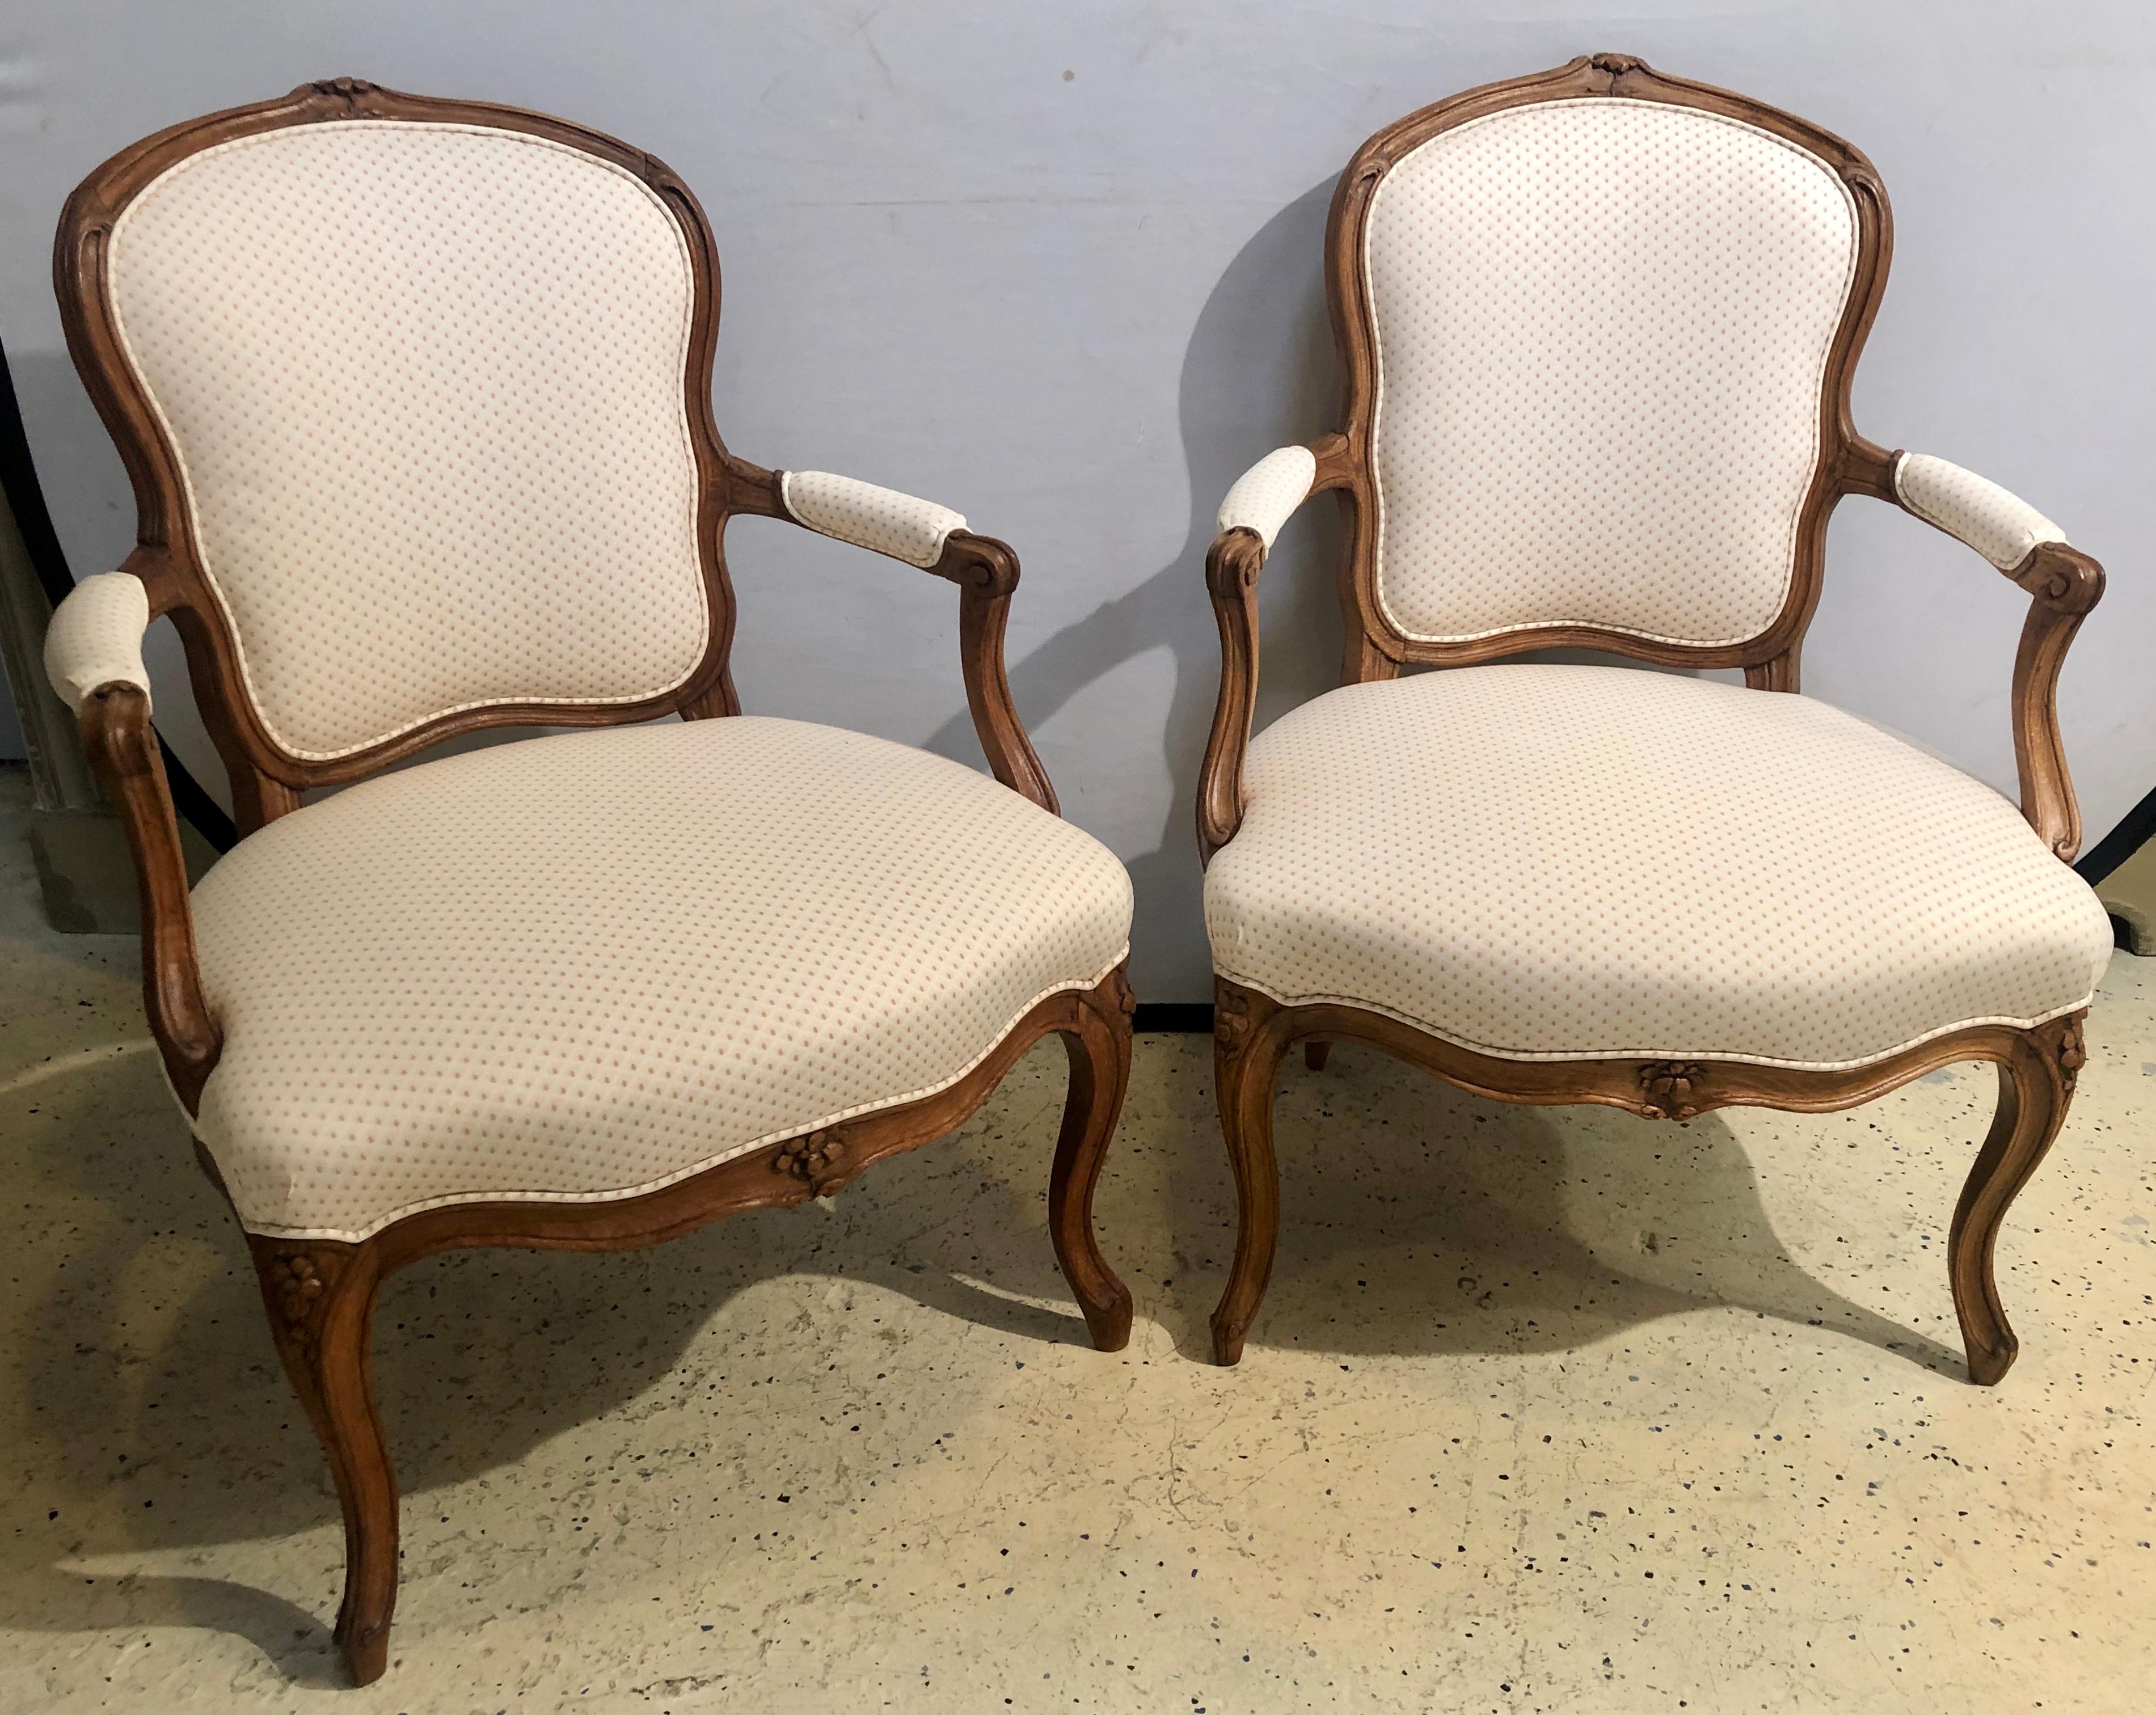 Louis XV 18th Century Pair of Beechwood Fauteuils or Armchairs with Provenance